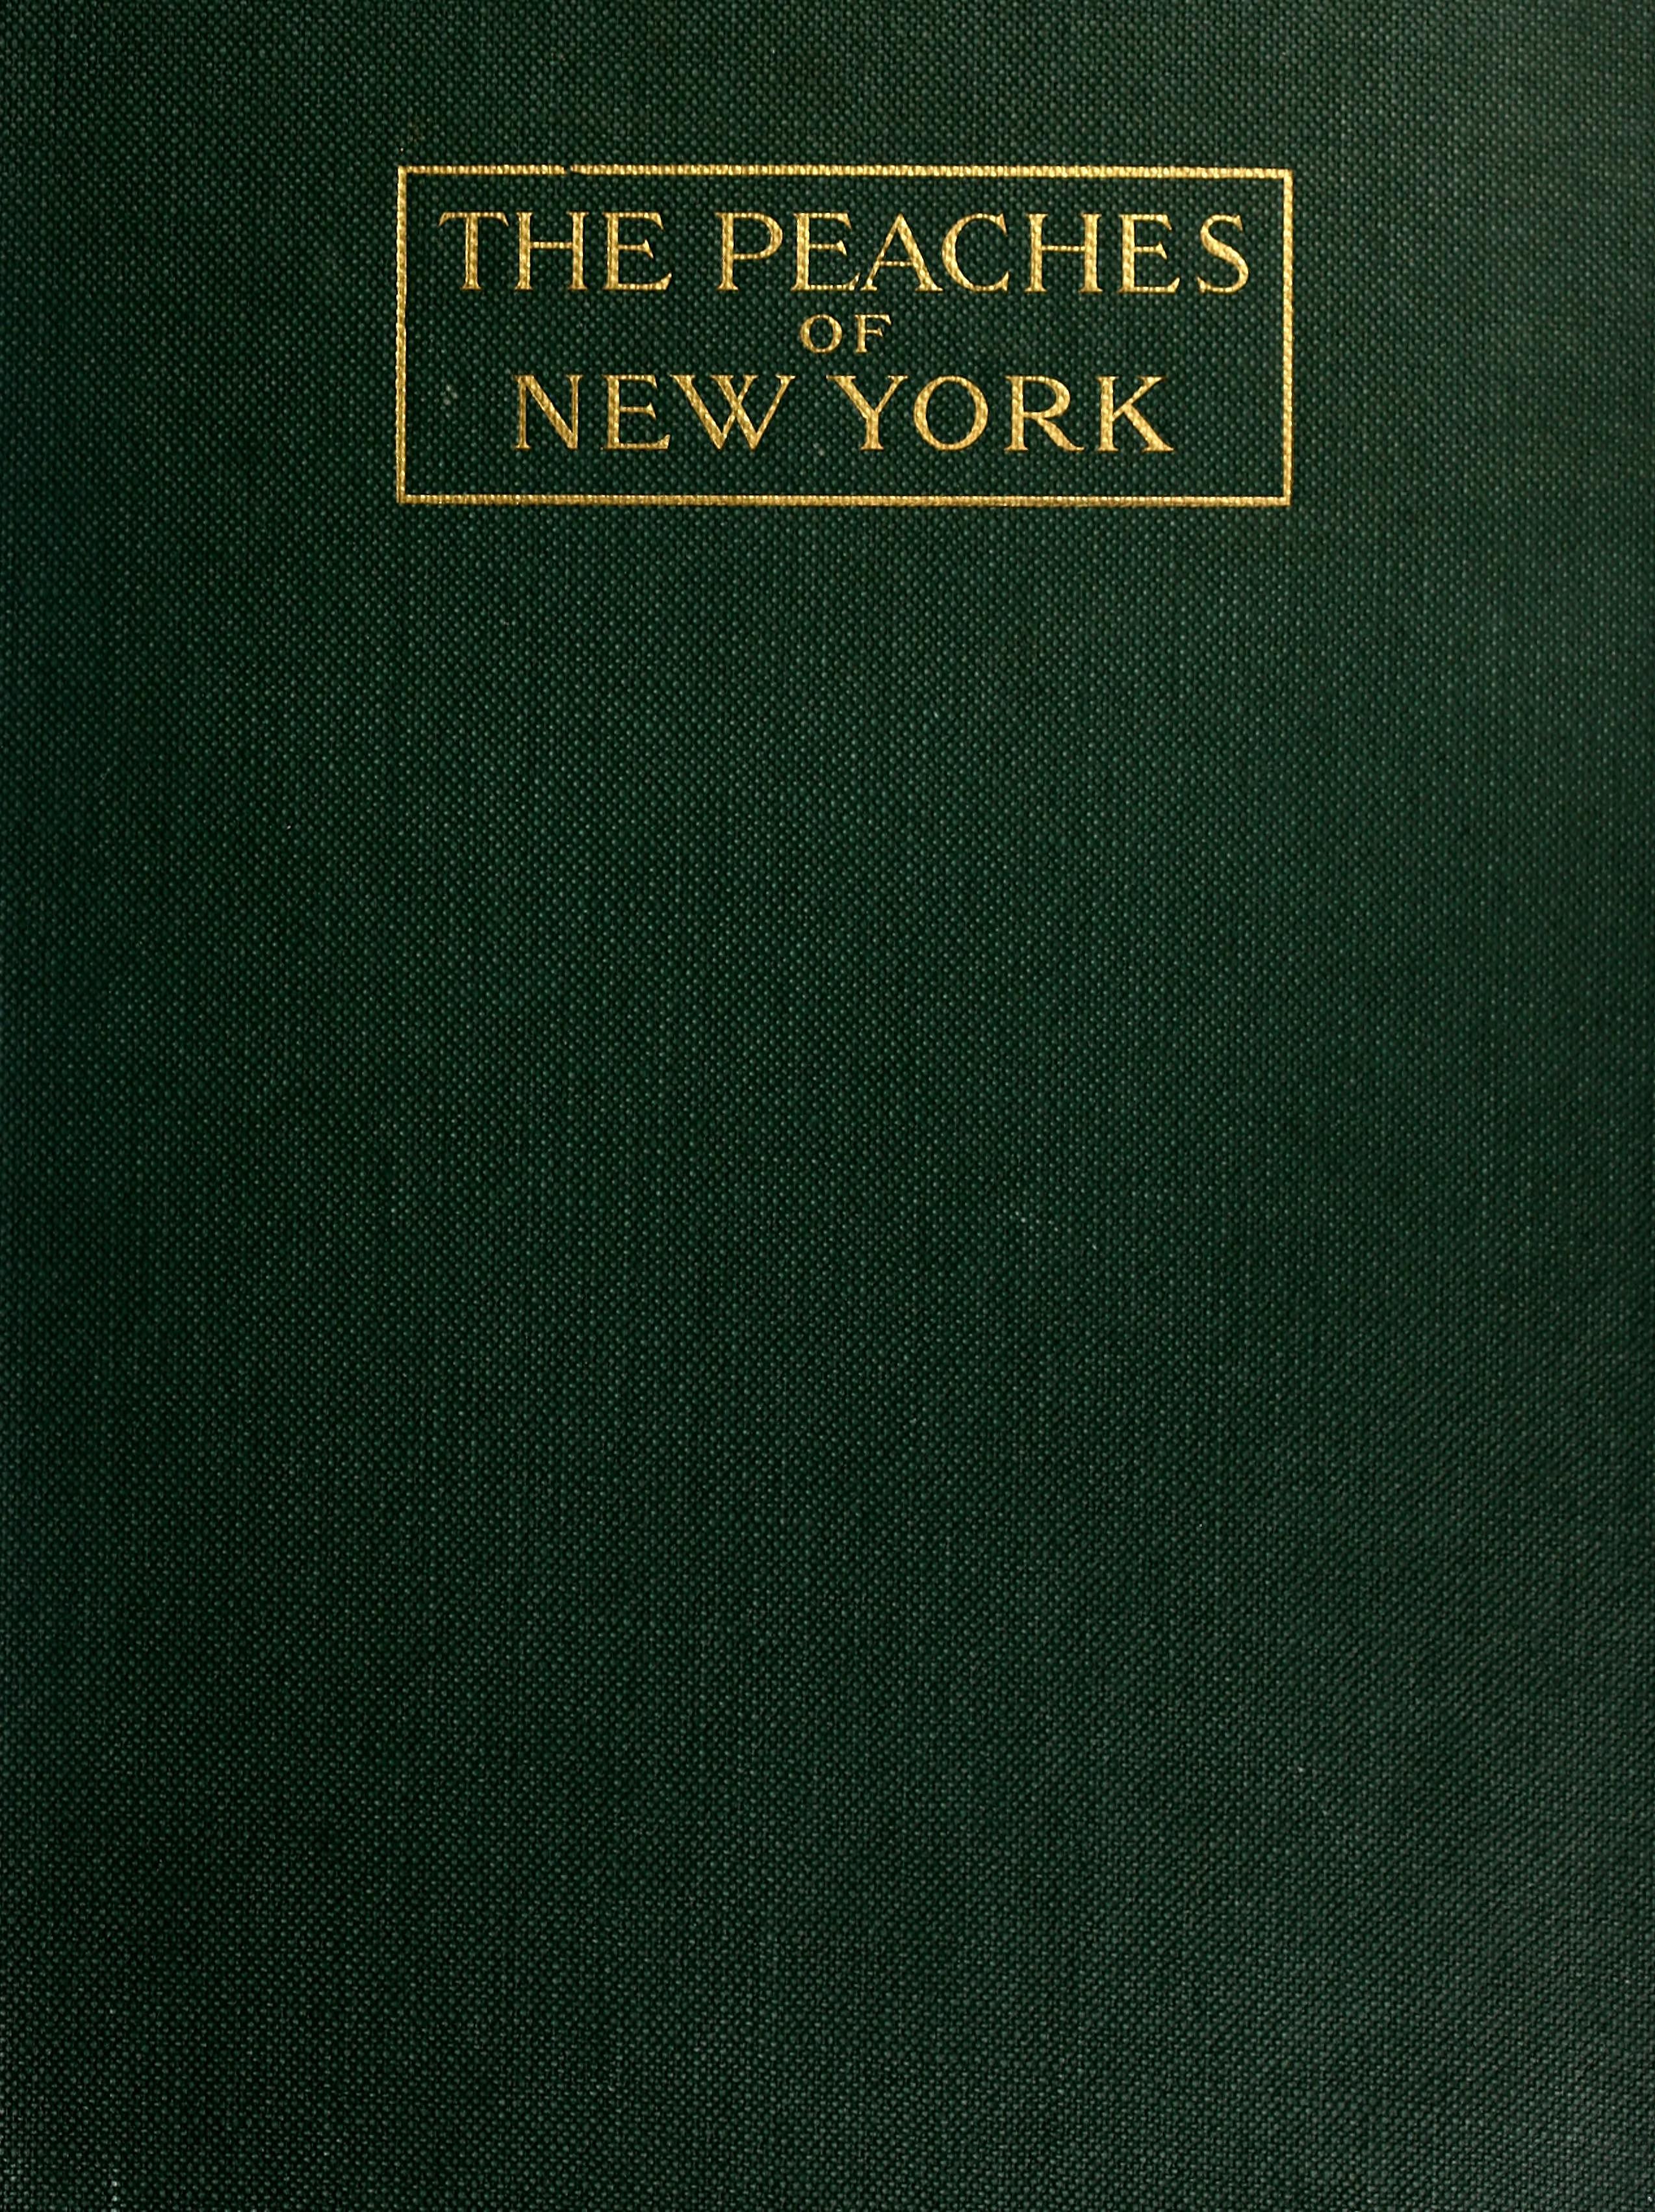 The peaches of New York, by U.P. Hedrick, assisted by G.H. Howe, O.M. Taylor ...